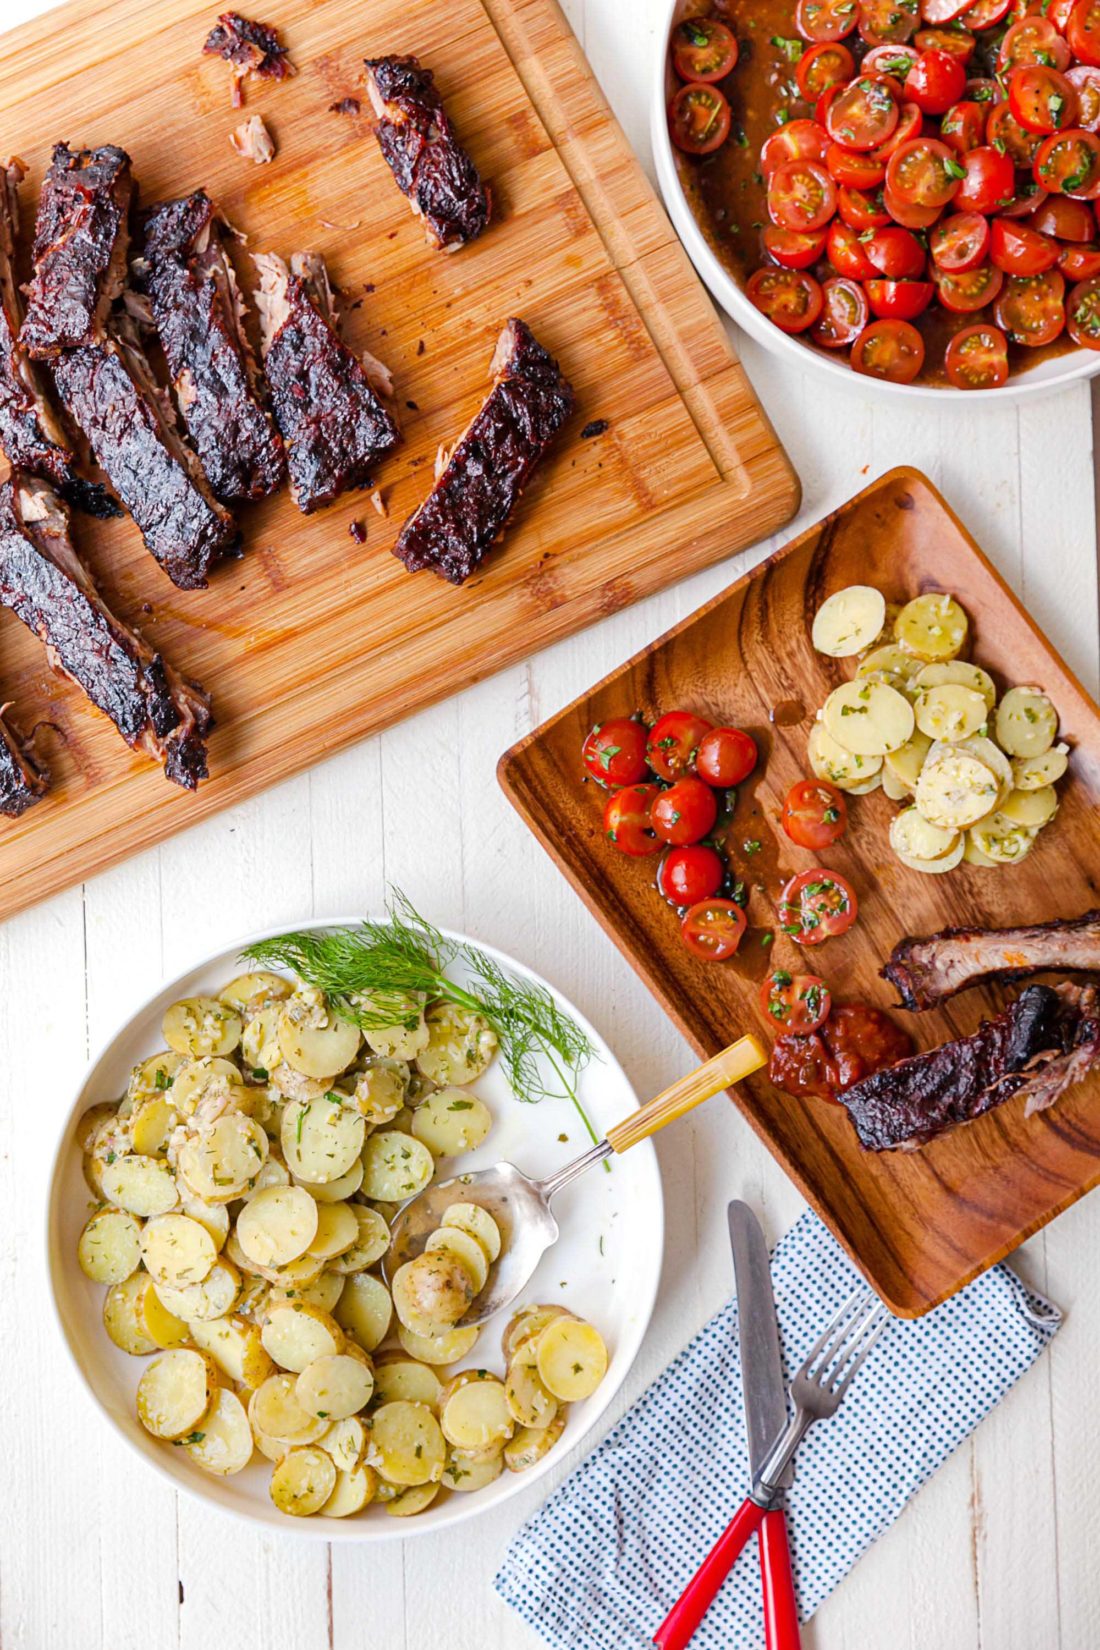 Cajun Sticky Ribs, potatoes, and tomatoes on a wooden plate.